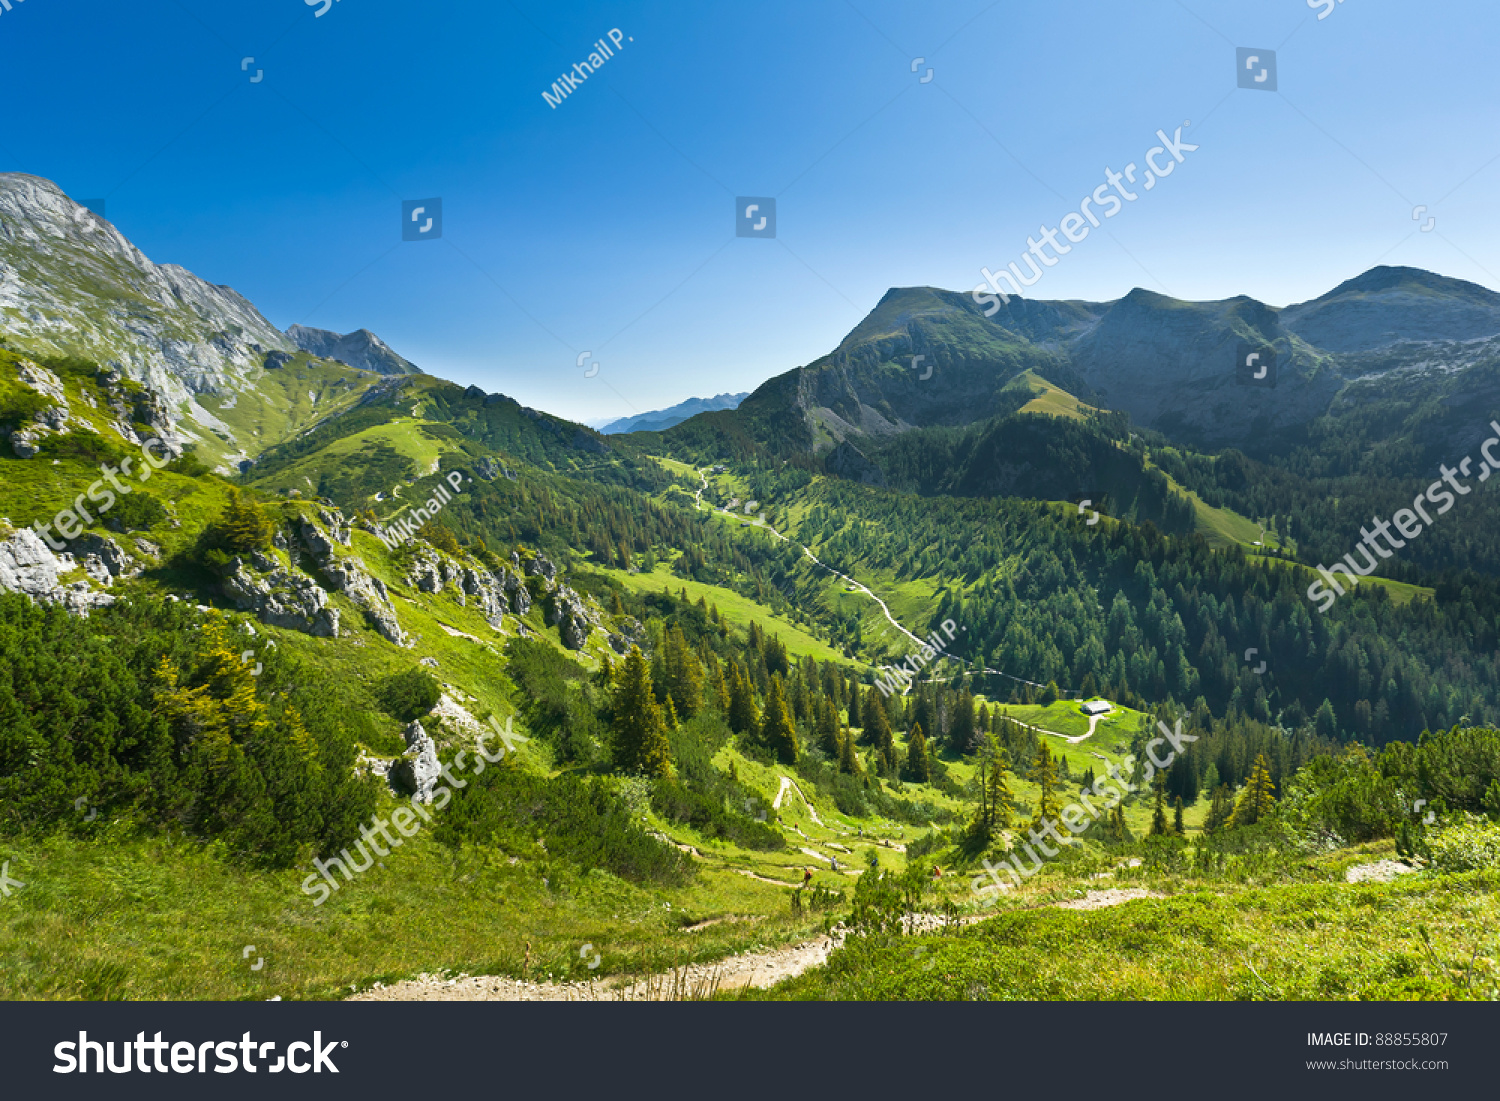 View of the mountain valley. Germany. Jenner am Koenigssee. #88855807